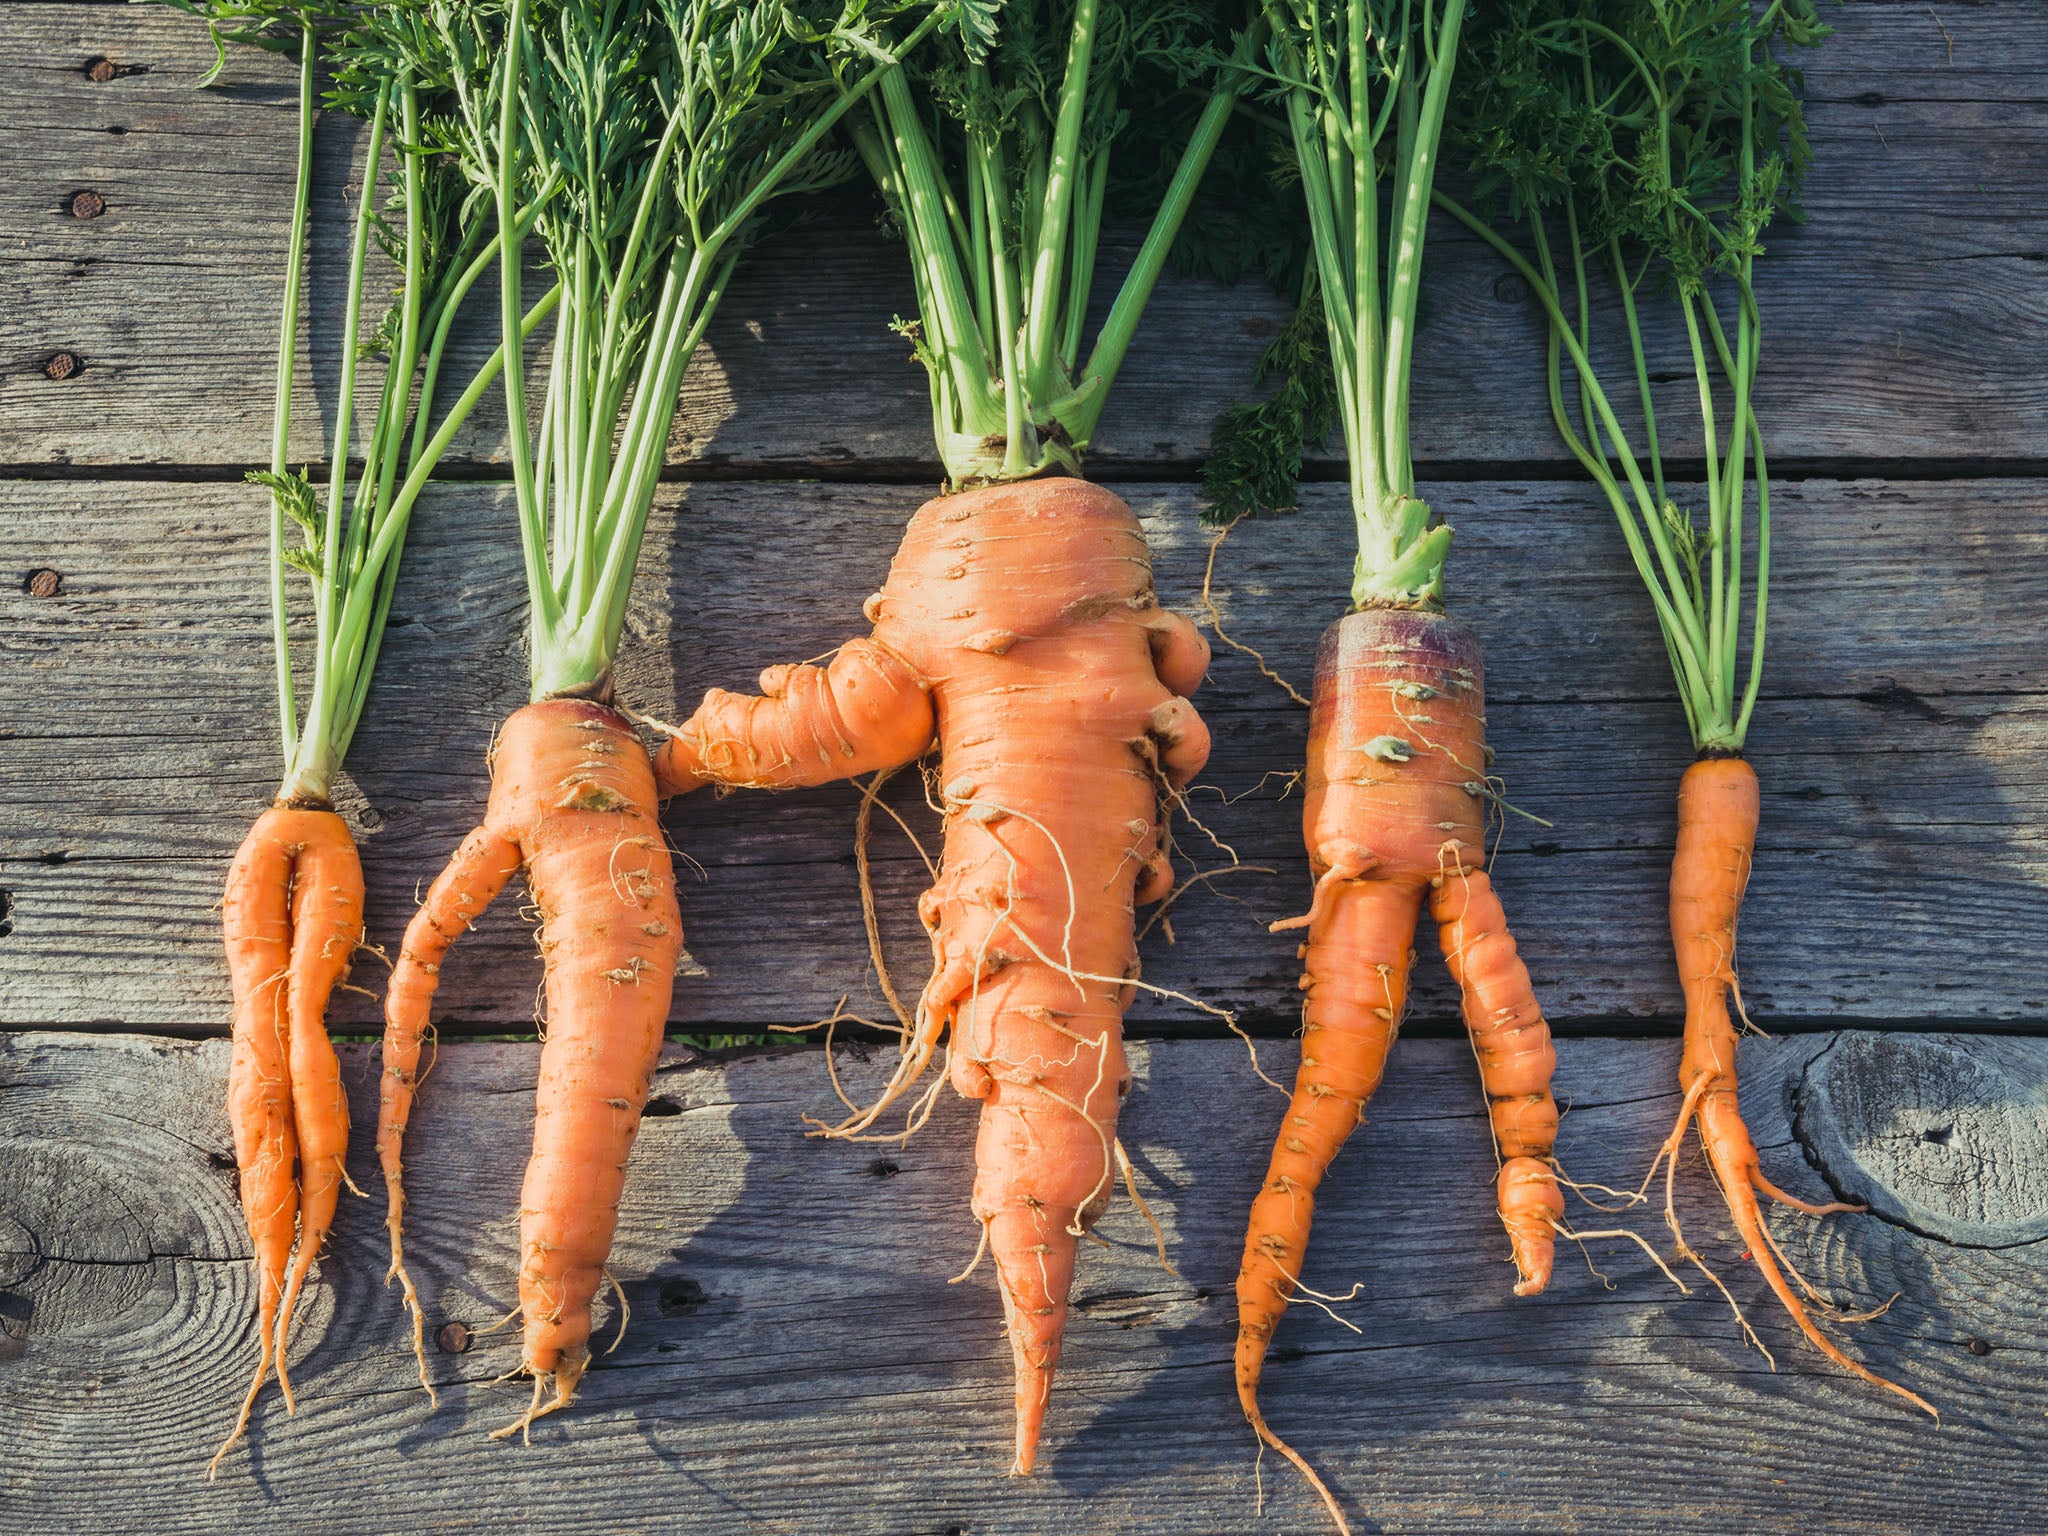 Sales of ‘wonky veg’ have risen in recent years